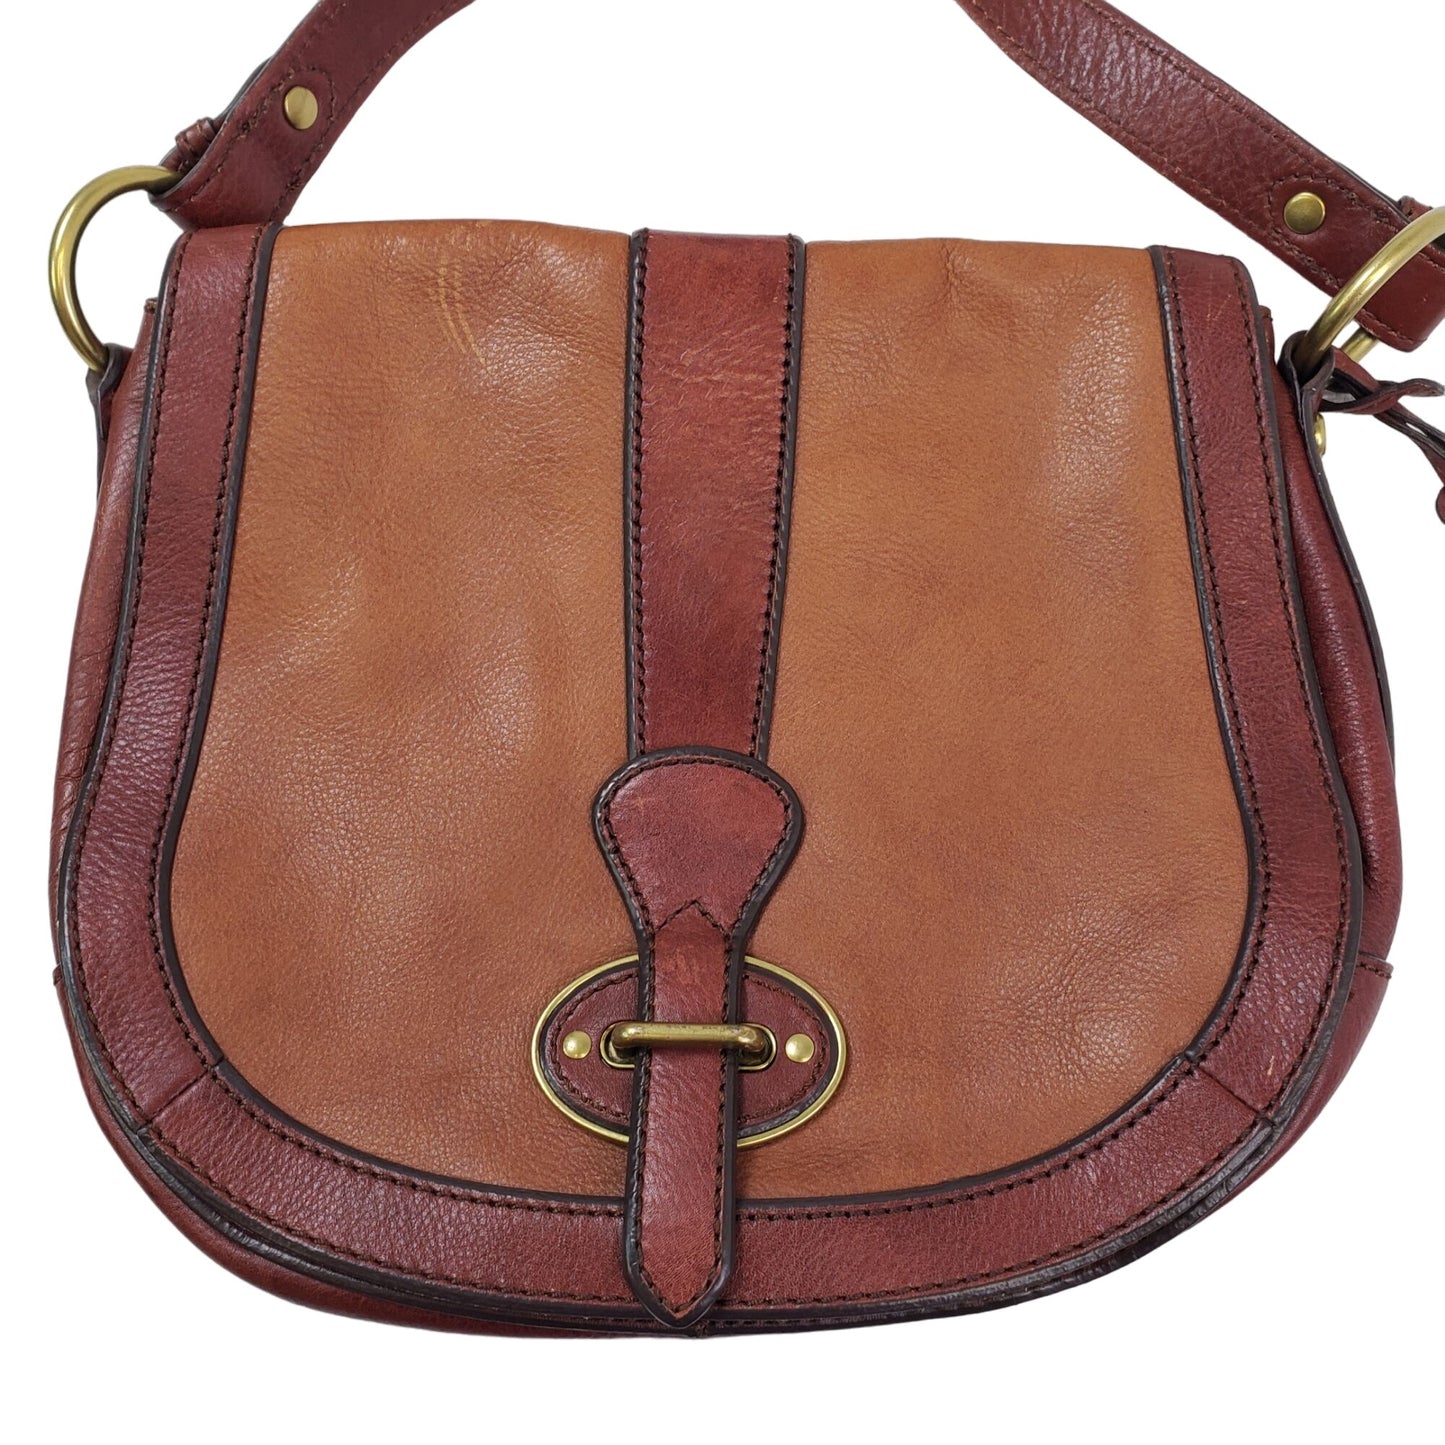 Fossil Vintage Reissue Leather Saddle Crossbody Bag with Key Tag